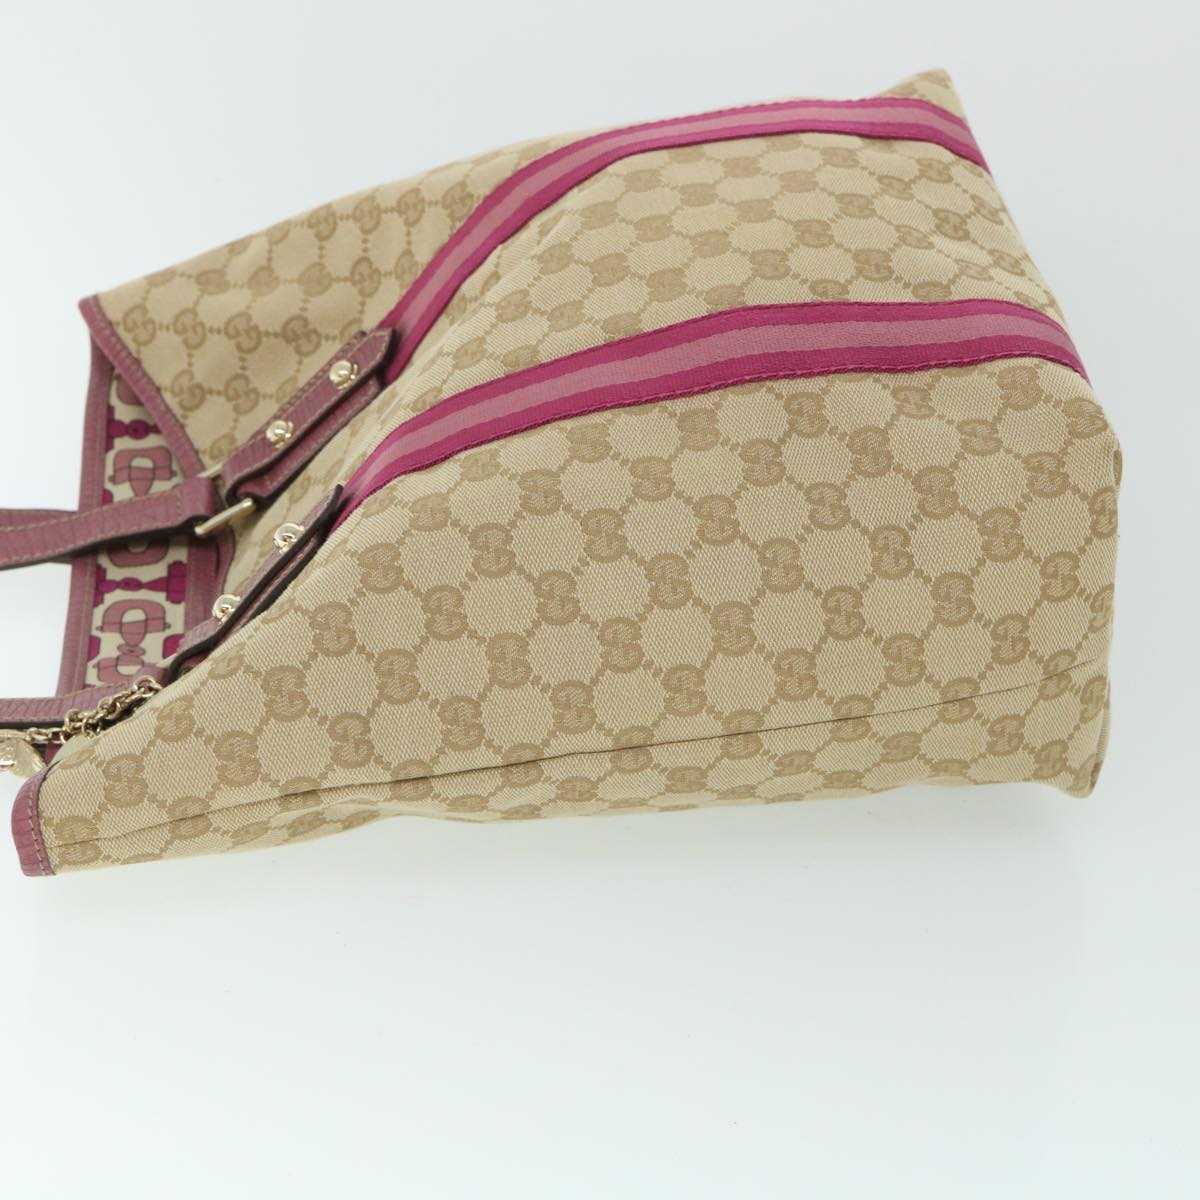 Gucci Gg Canvas Sherry Line Tote Bag Beige Pink 162899 Auth 54900